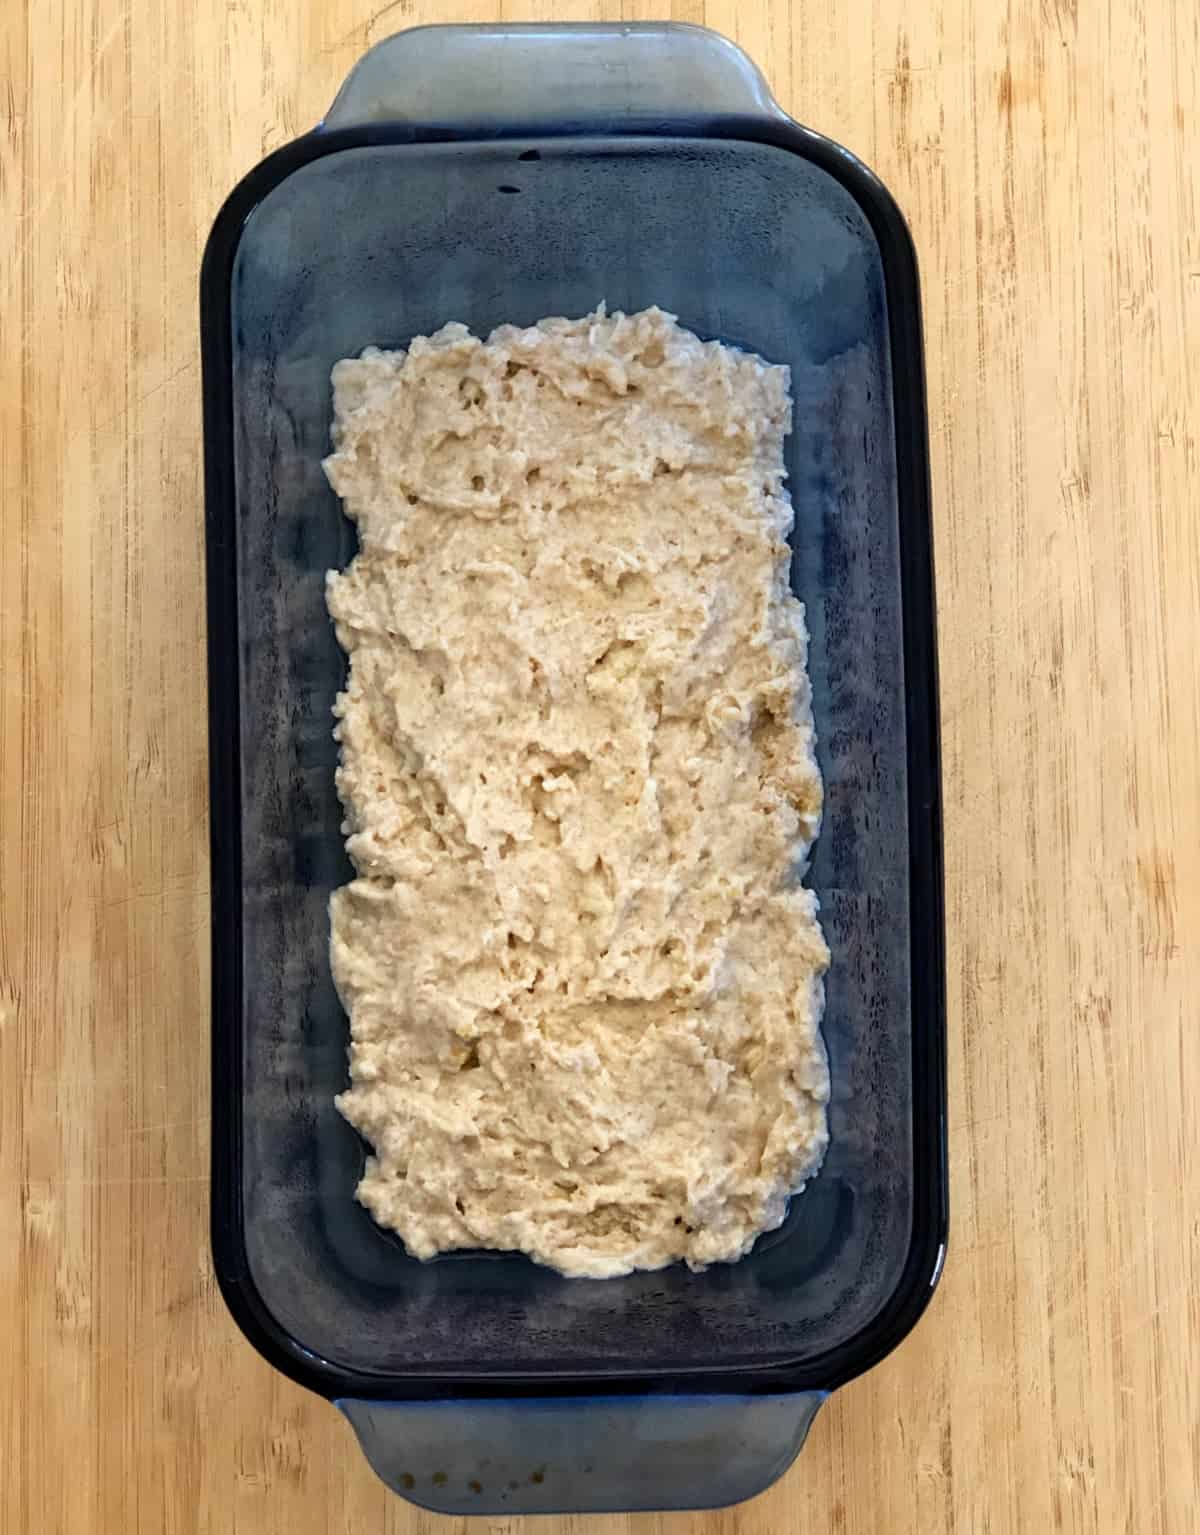 Prepared baking mix spread in blue glass loaf pan.